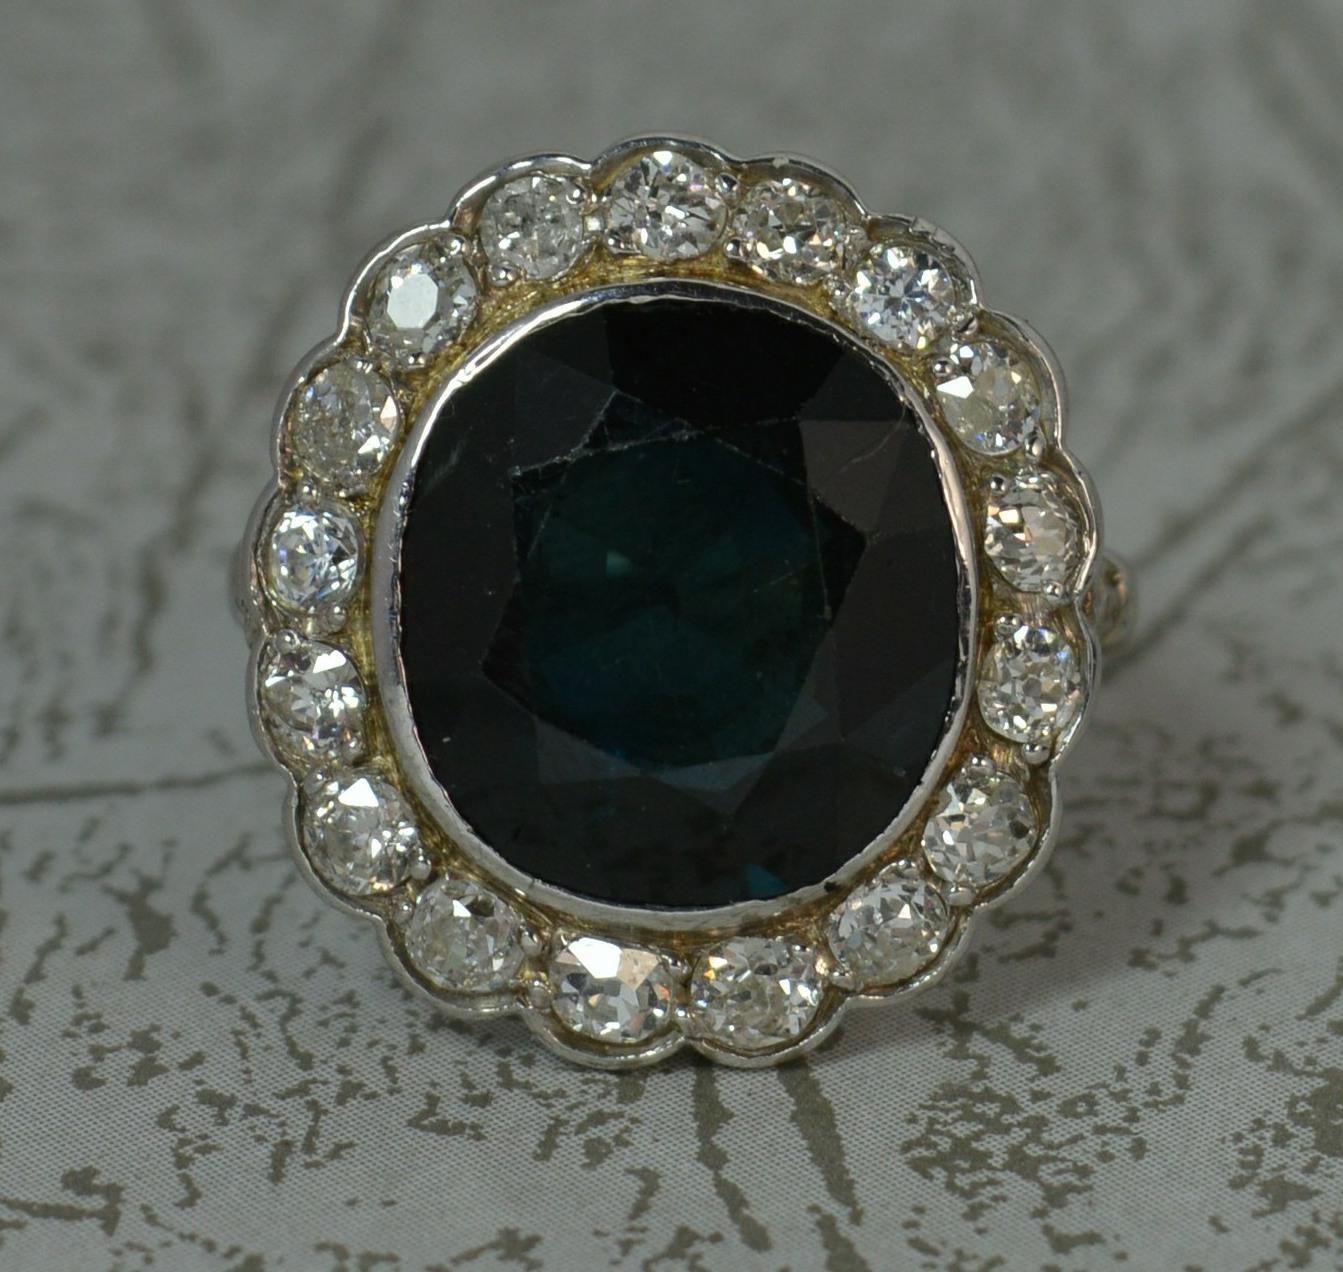 A beautiful true antique cluster panel ring. c1930.
Solid 18 carat white gold example.
Designed with a large oval cushion dark blue / green sapphire. Measures approx 12.4mm x 13.3mm x 4.2mm approx.
Surrounding are seventeen natural old cut diamonds